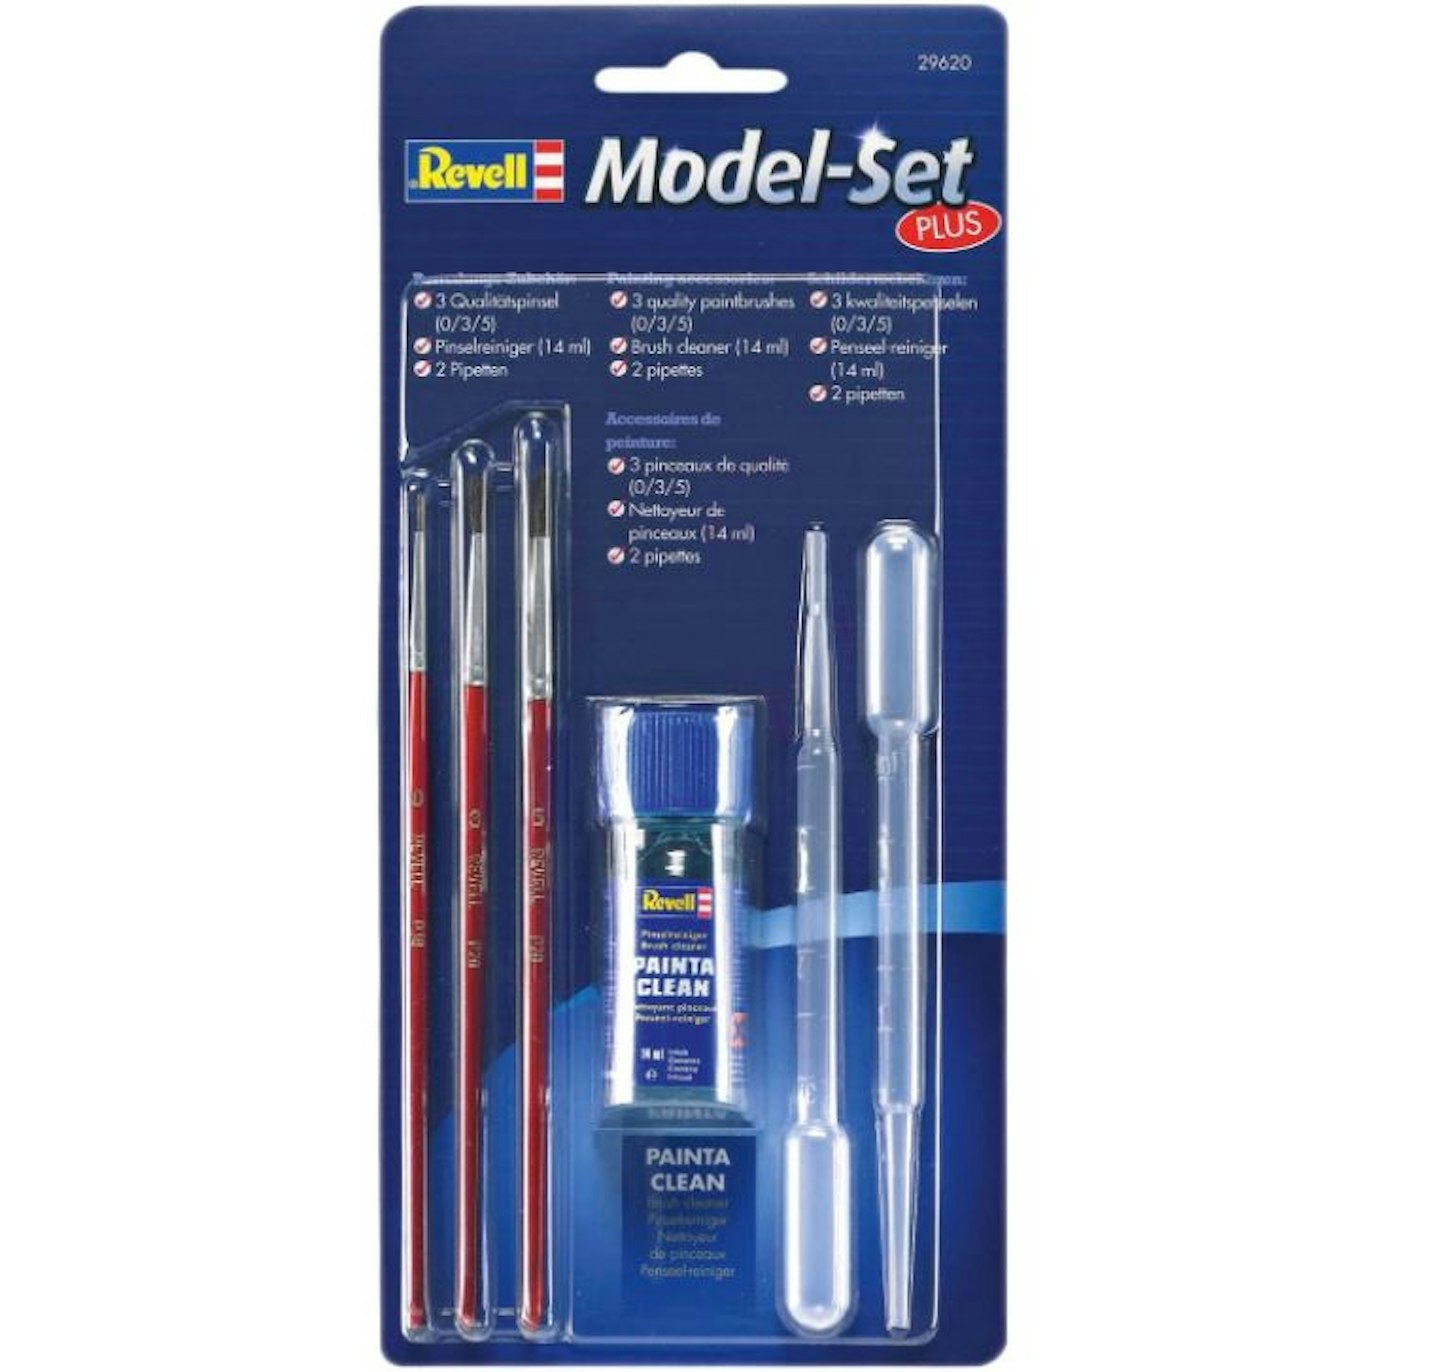 Revell Model Set Plus Painting Accessories